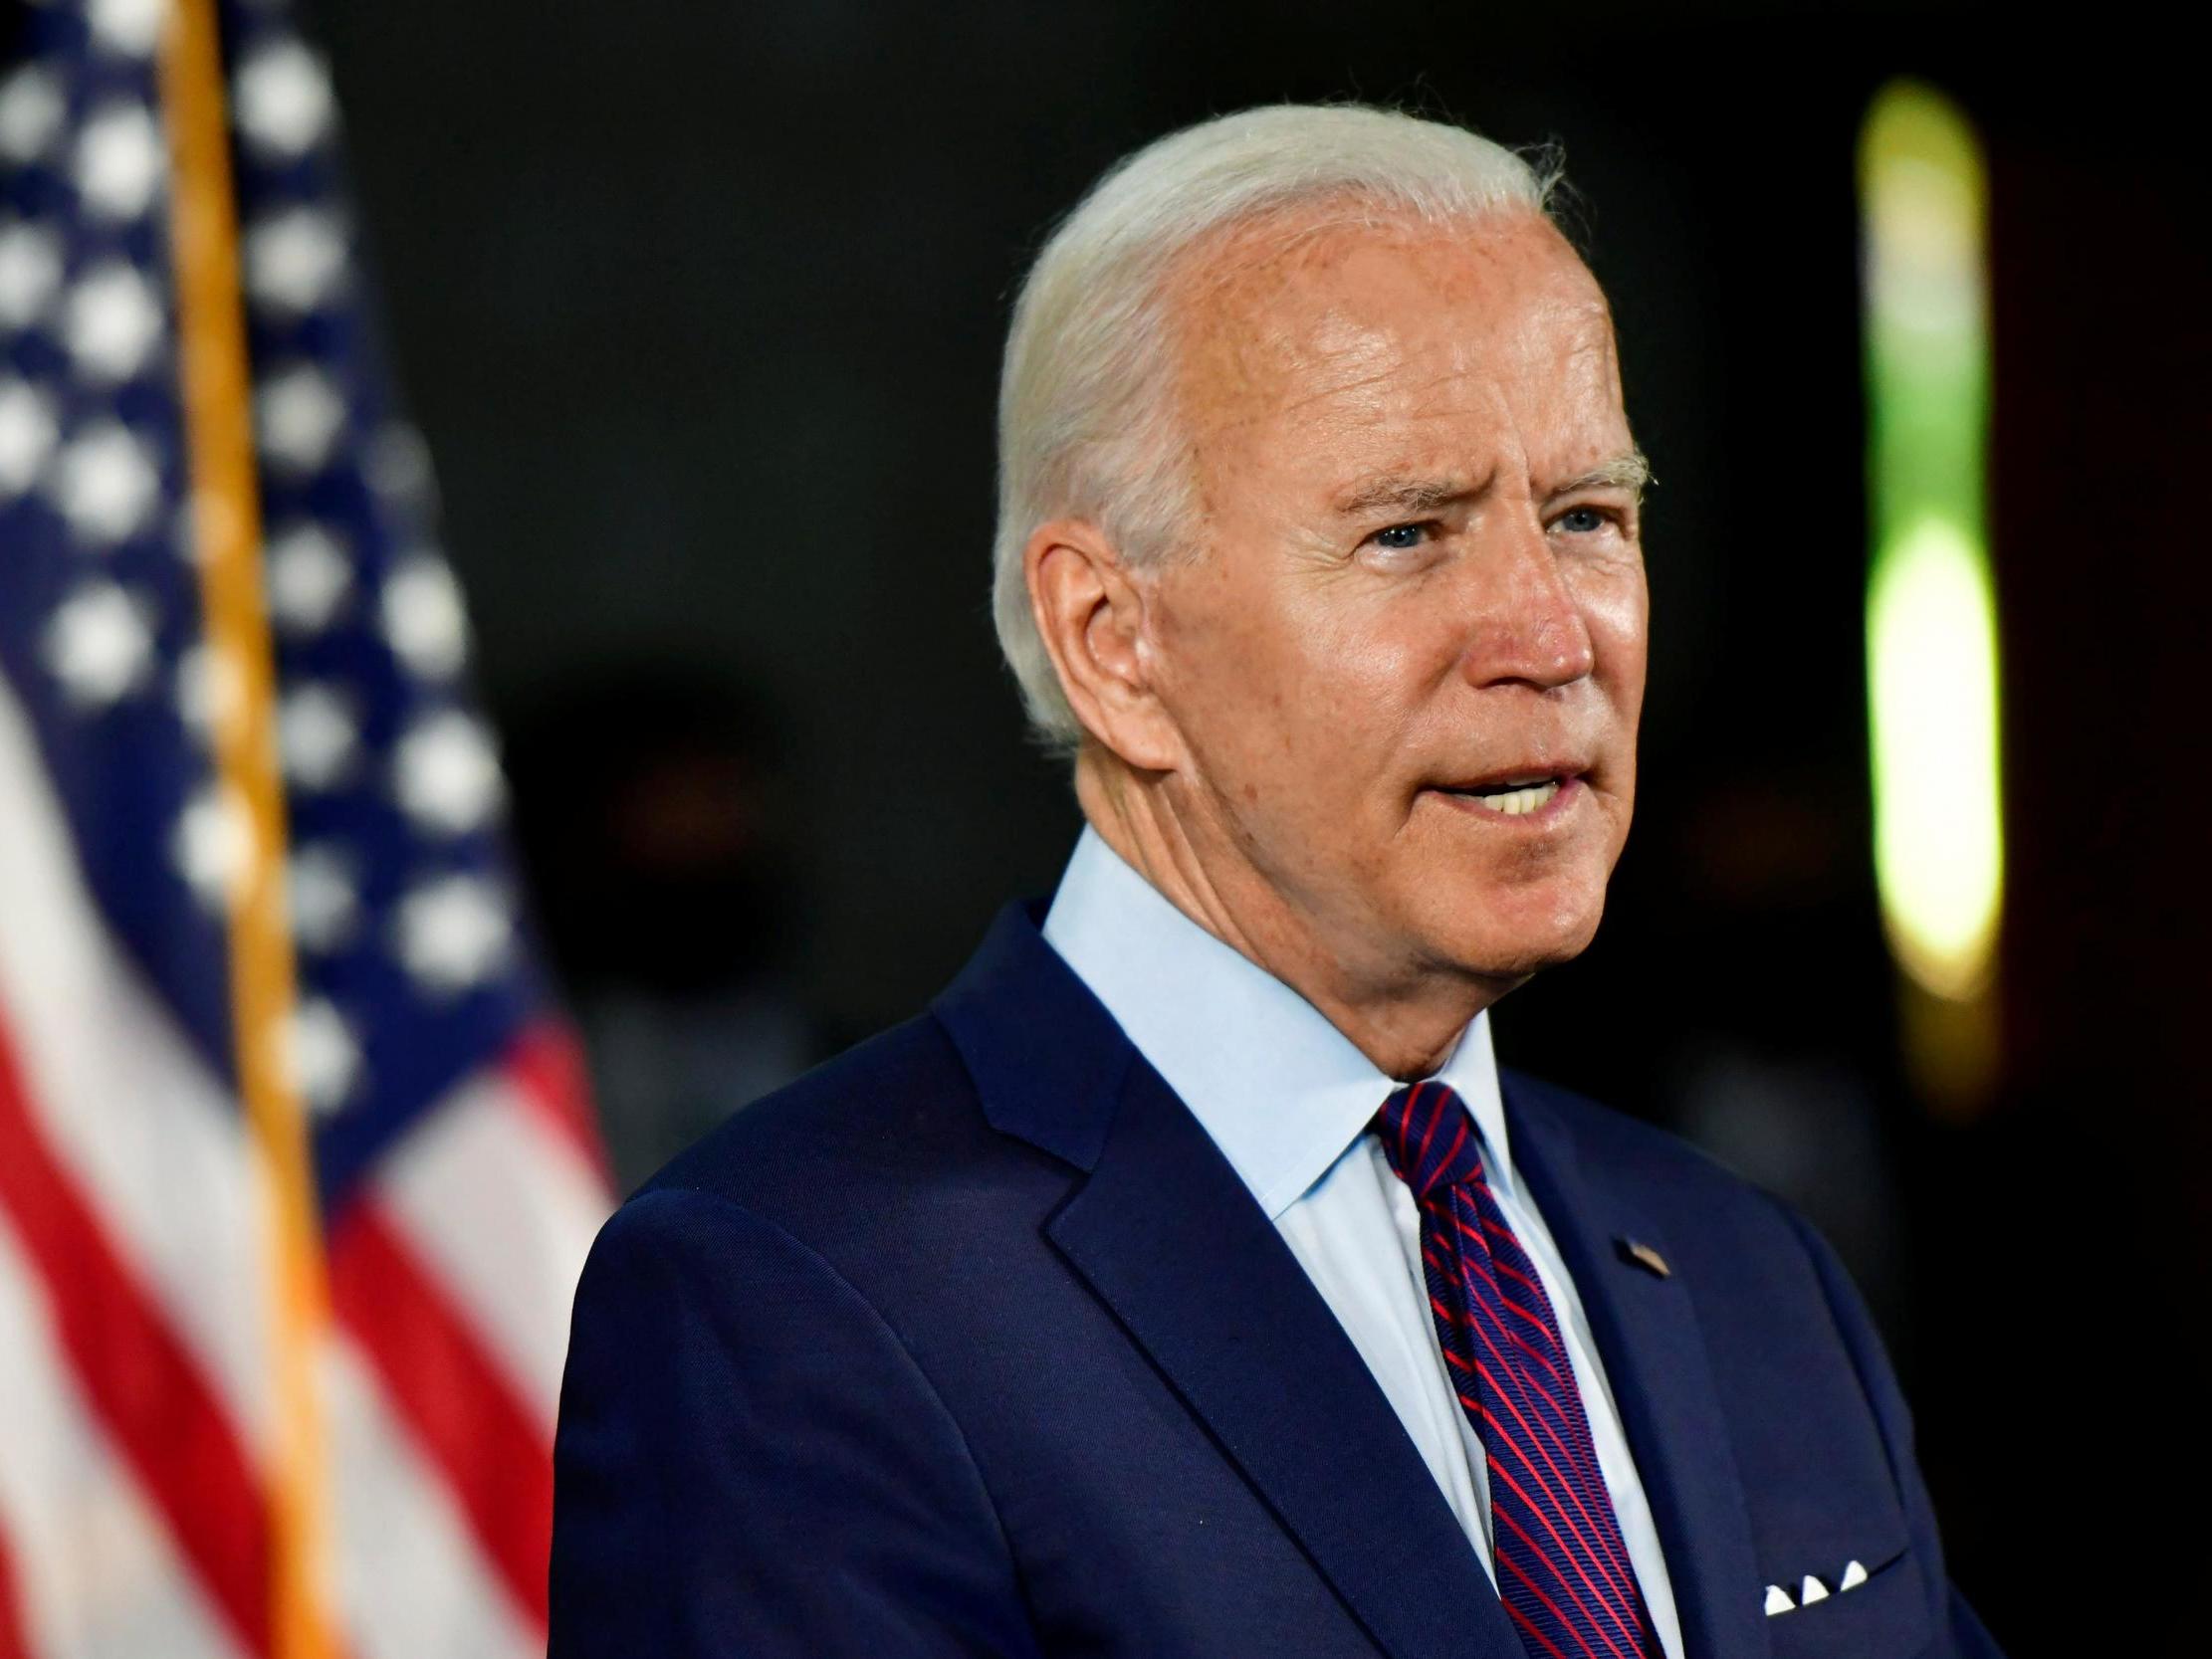 Democratic presidential nominee Joe Biden has a momentous choice for who will be the vice president on his 2020 ticket. (Photo courtesy Reuters)